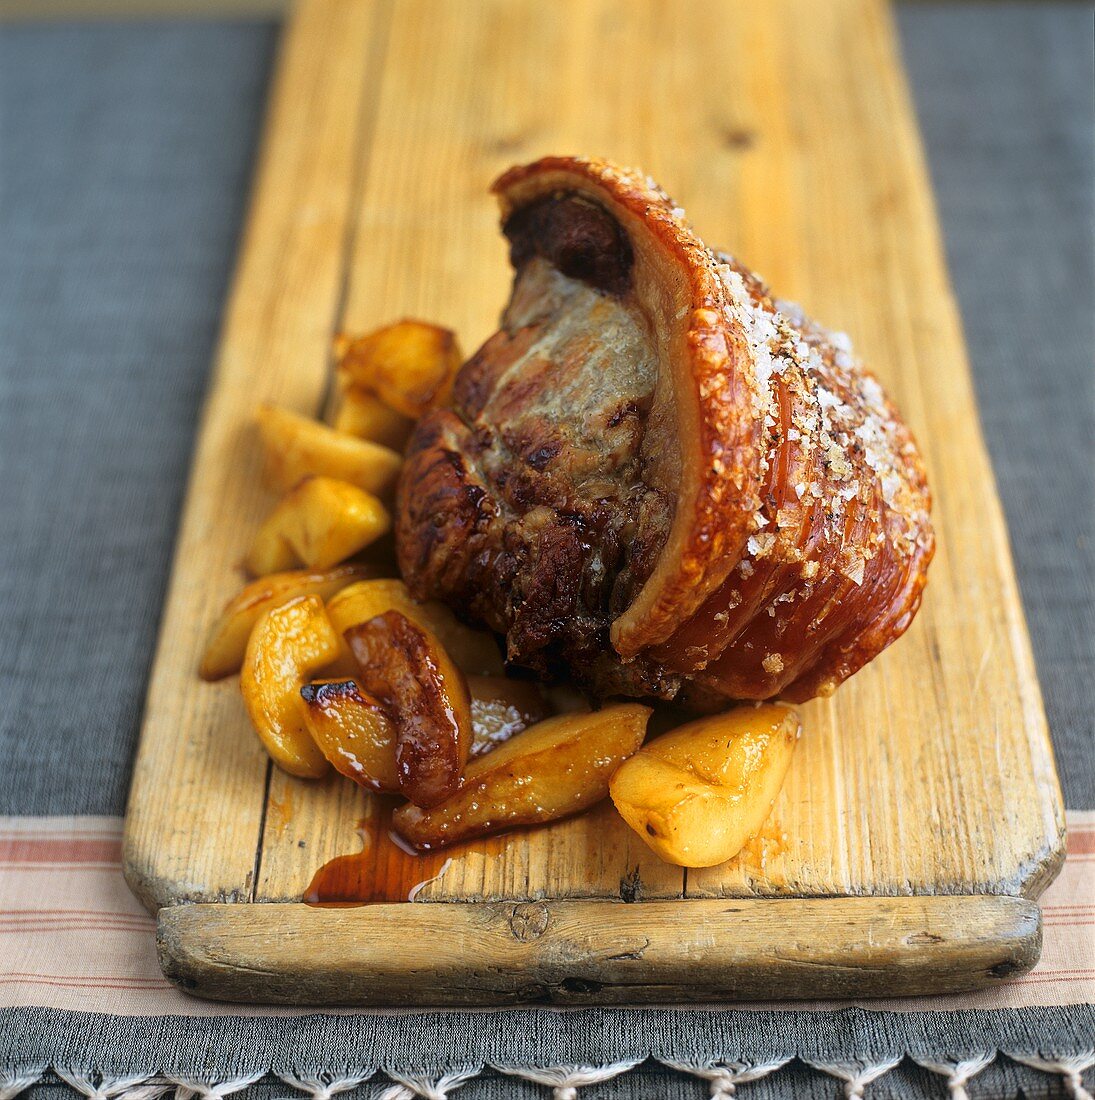 Roast pork with crackling, with potatoes on wooden board